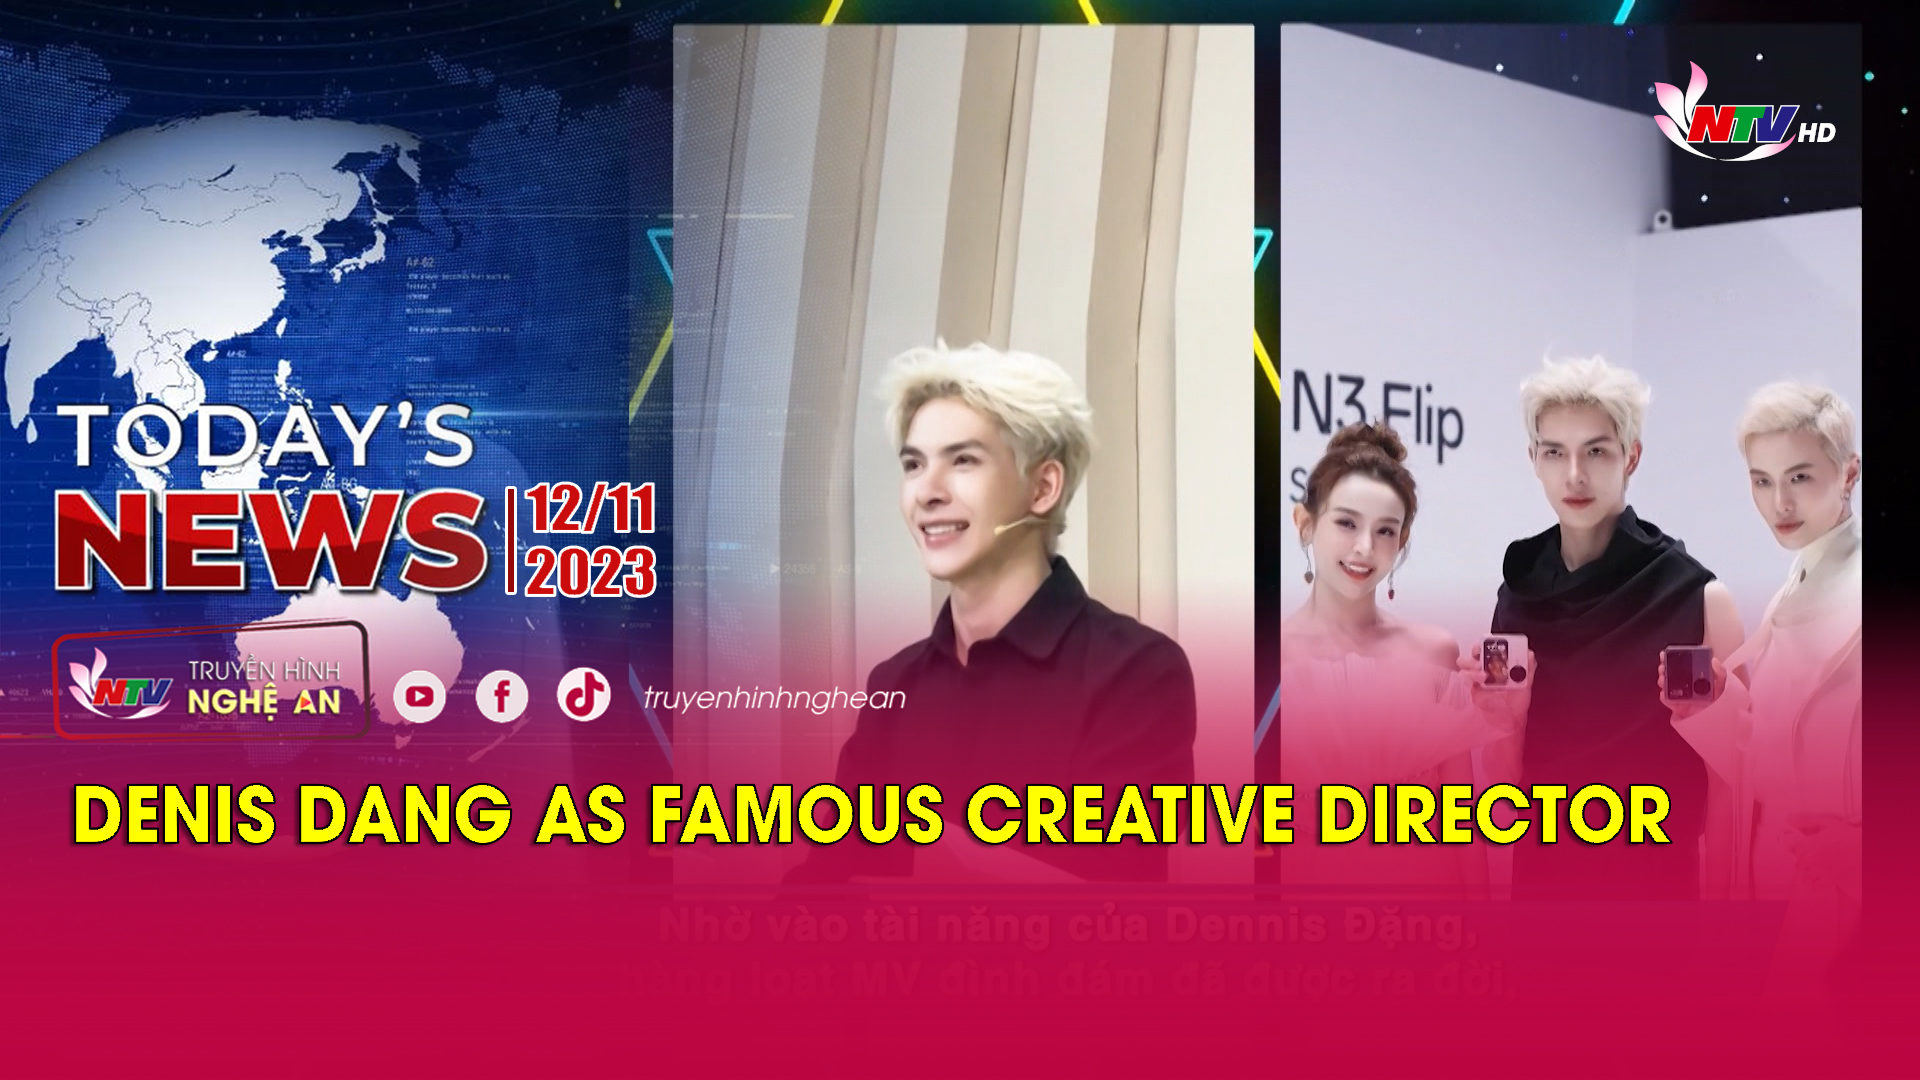 Today's News - 12/11/2023: Denis Dang as famous creative director